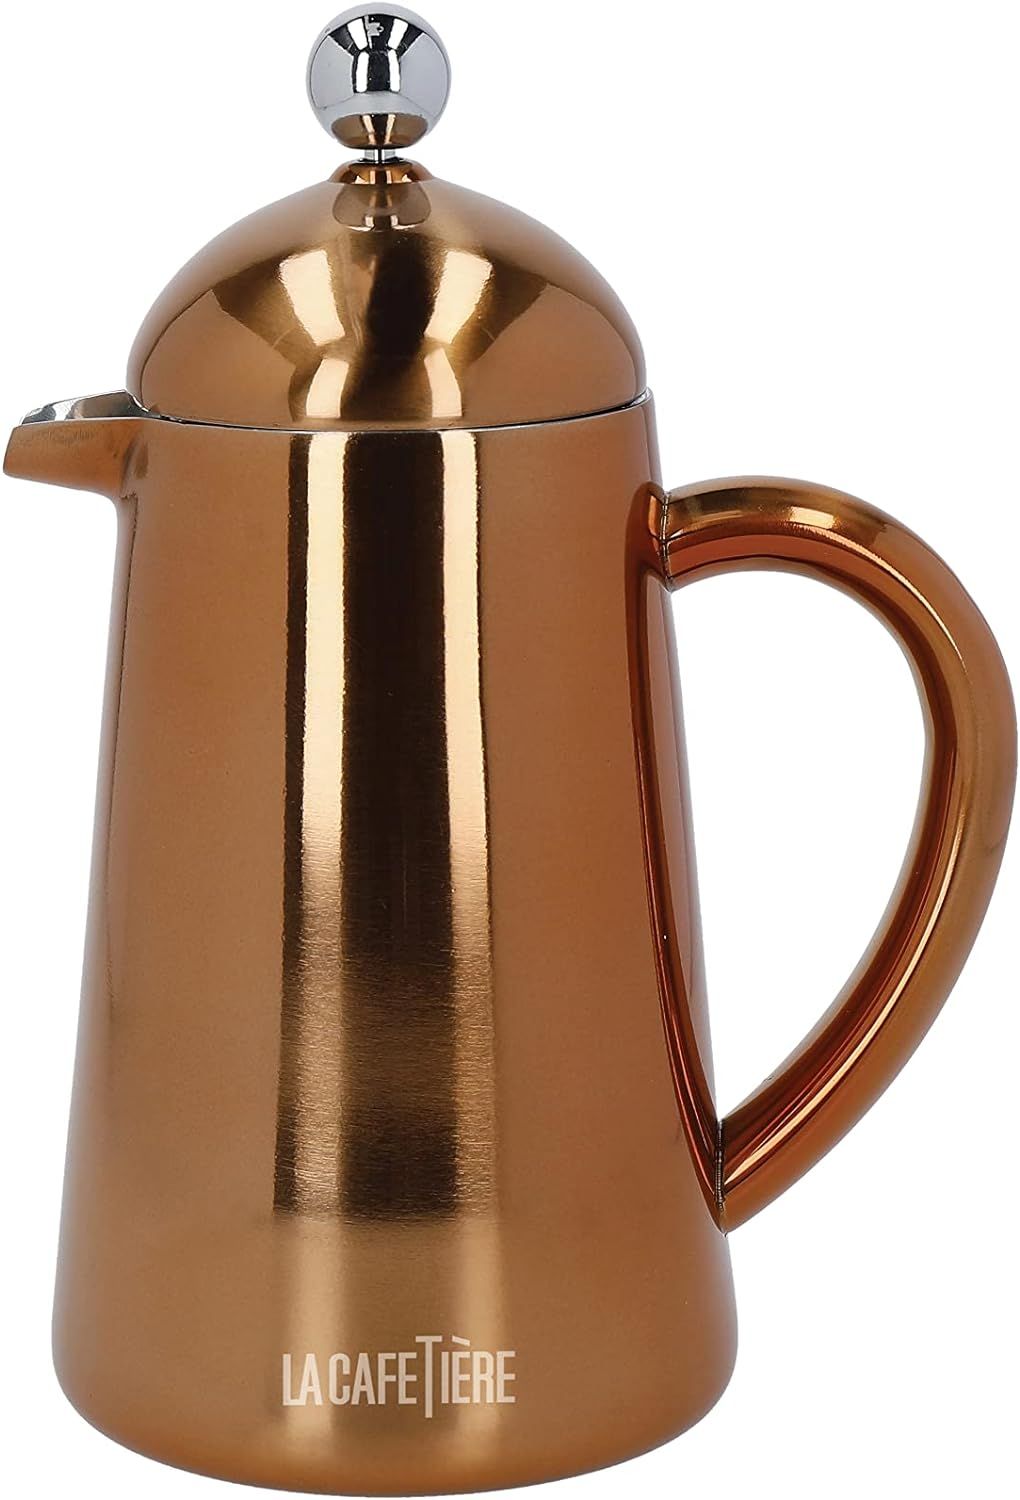 La Cafetière Havana Copper Stainless Steel Double Walled Cafetière, Three Cup, Gift Boxed | Amazon (UK)